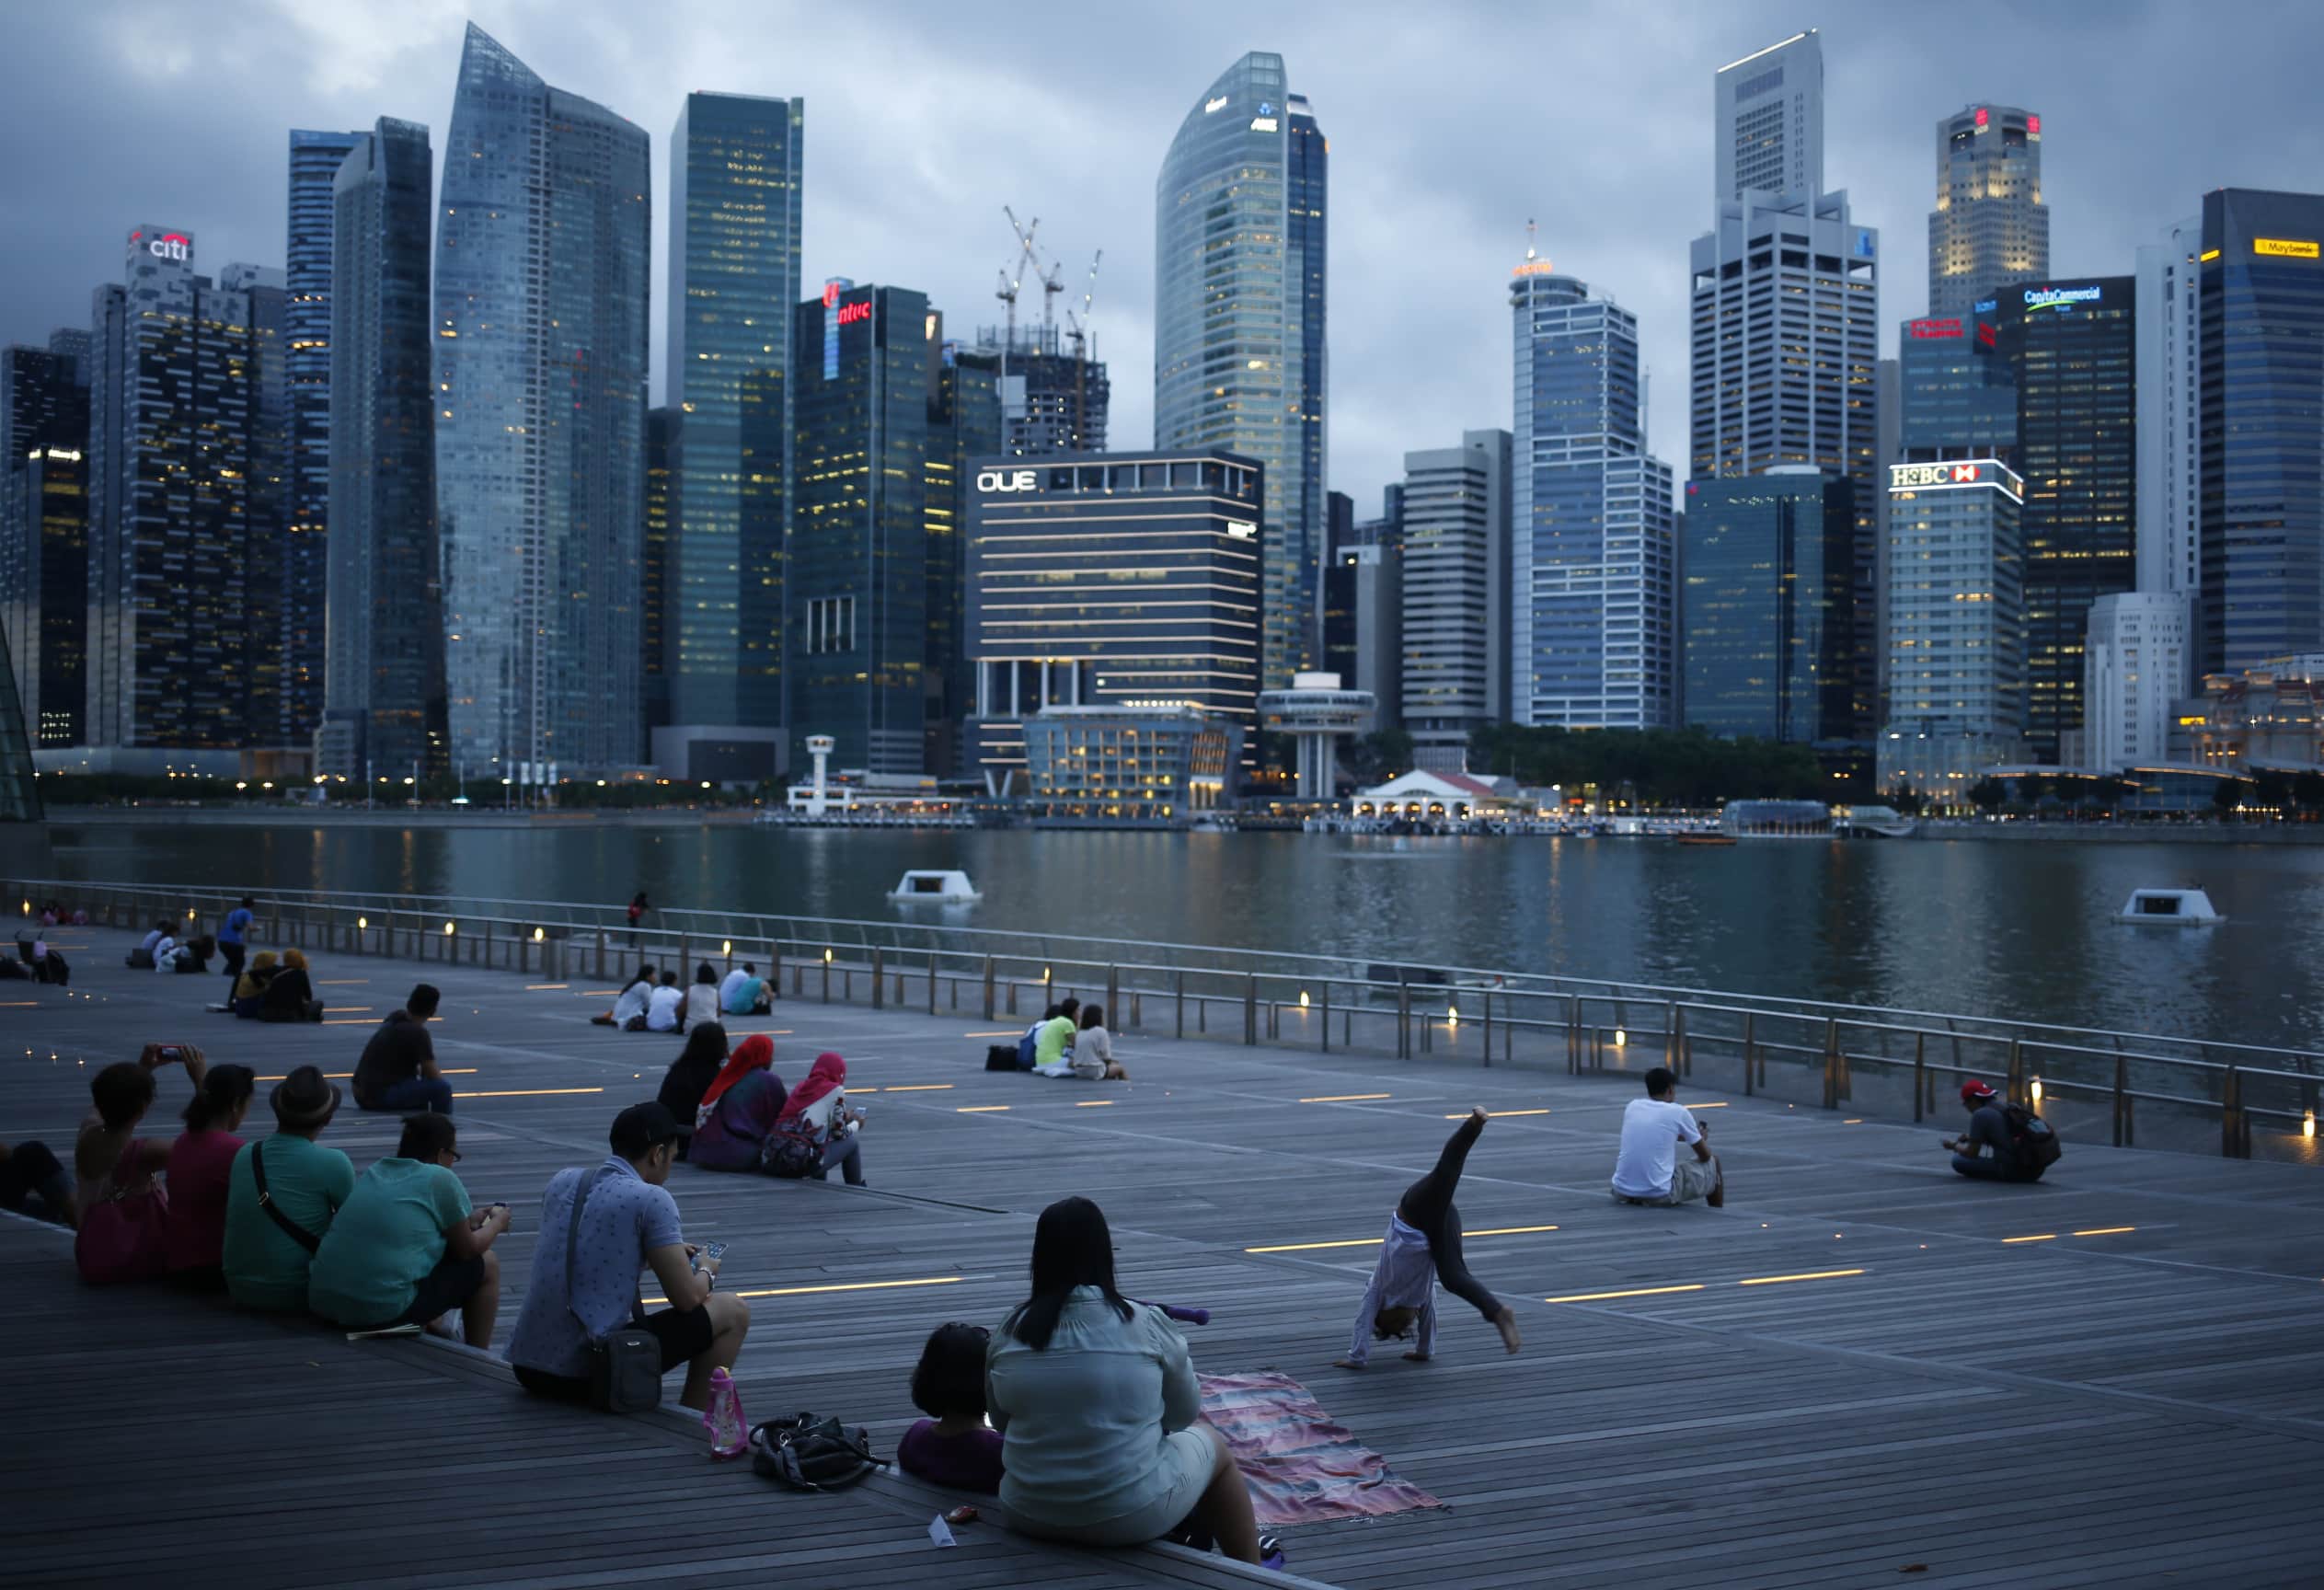 At Marina Bay overlooking the central business district in the evening in Singapore, REUTERS/Edgar Su